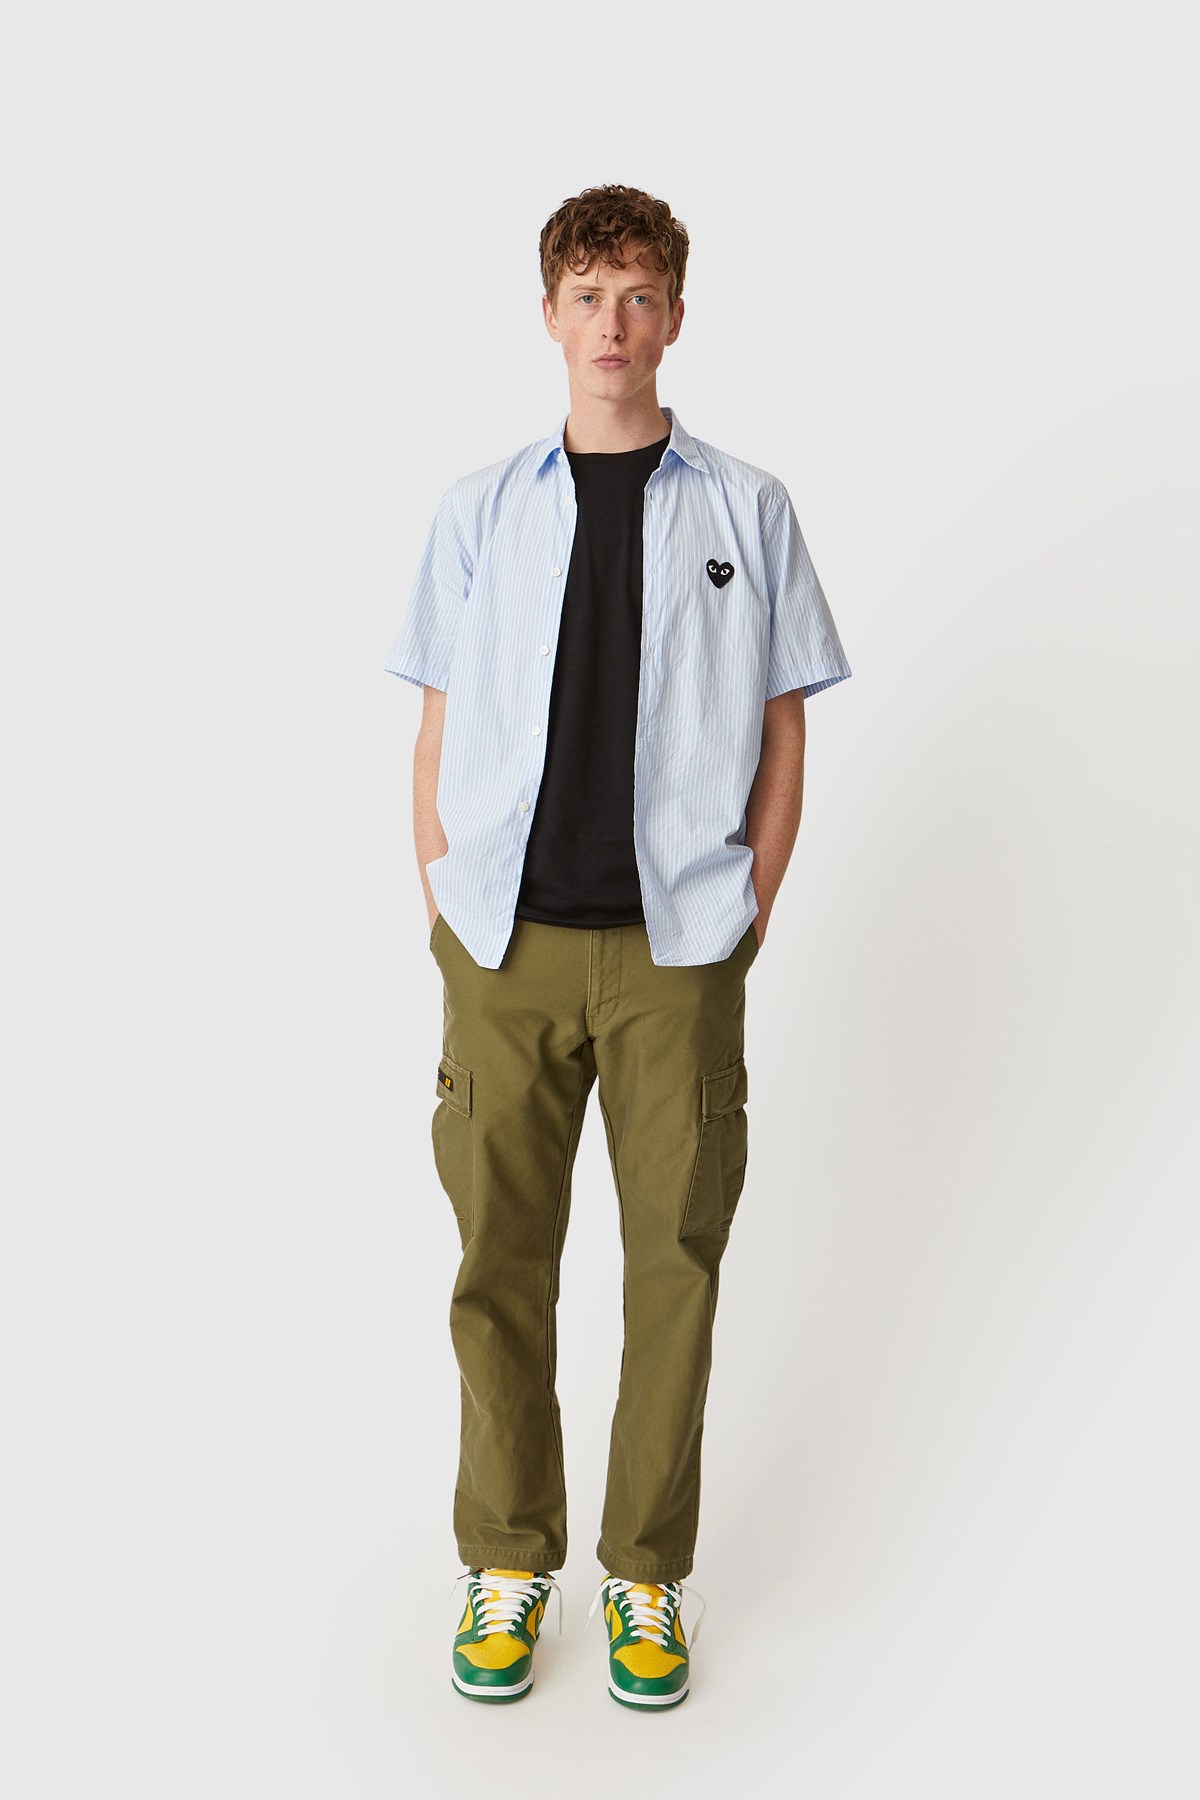 JUNGLE STOCK 01 / TROUSERS.   OLIVE DRAB